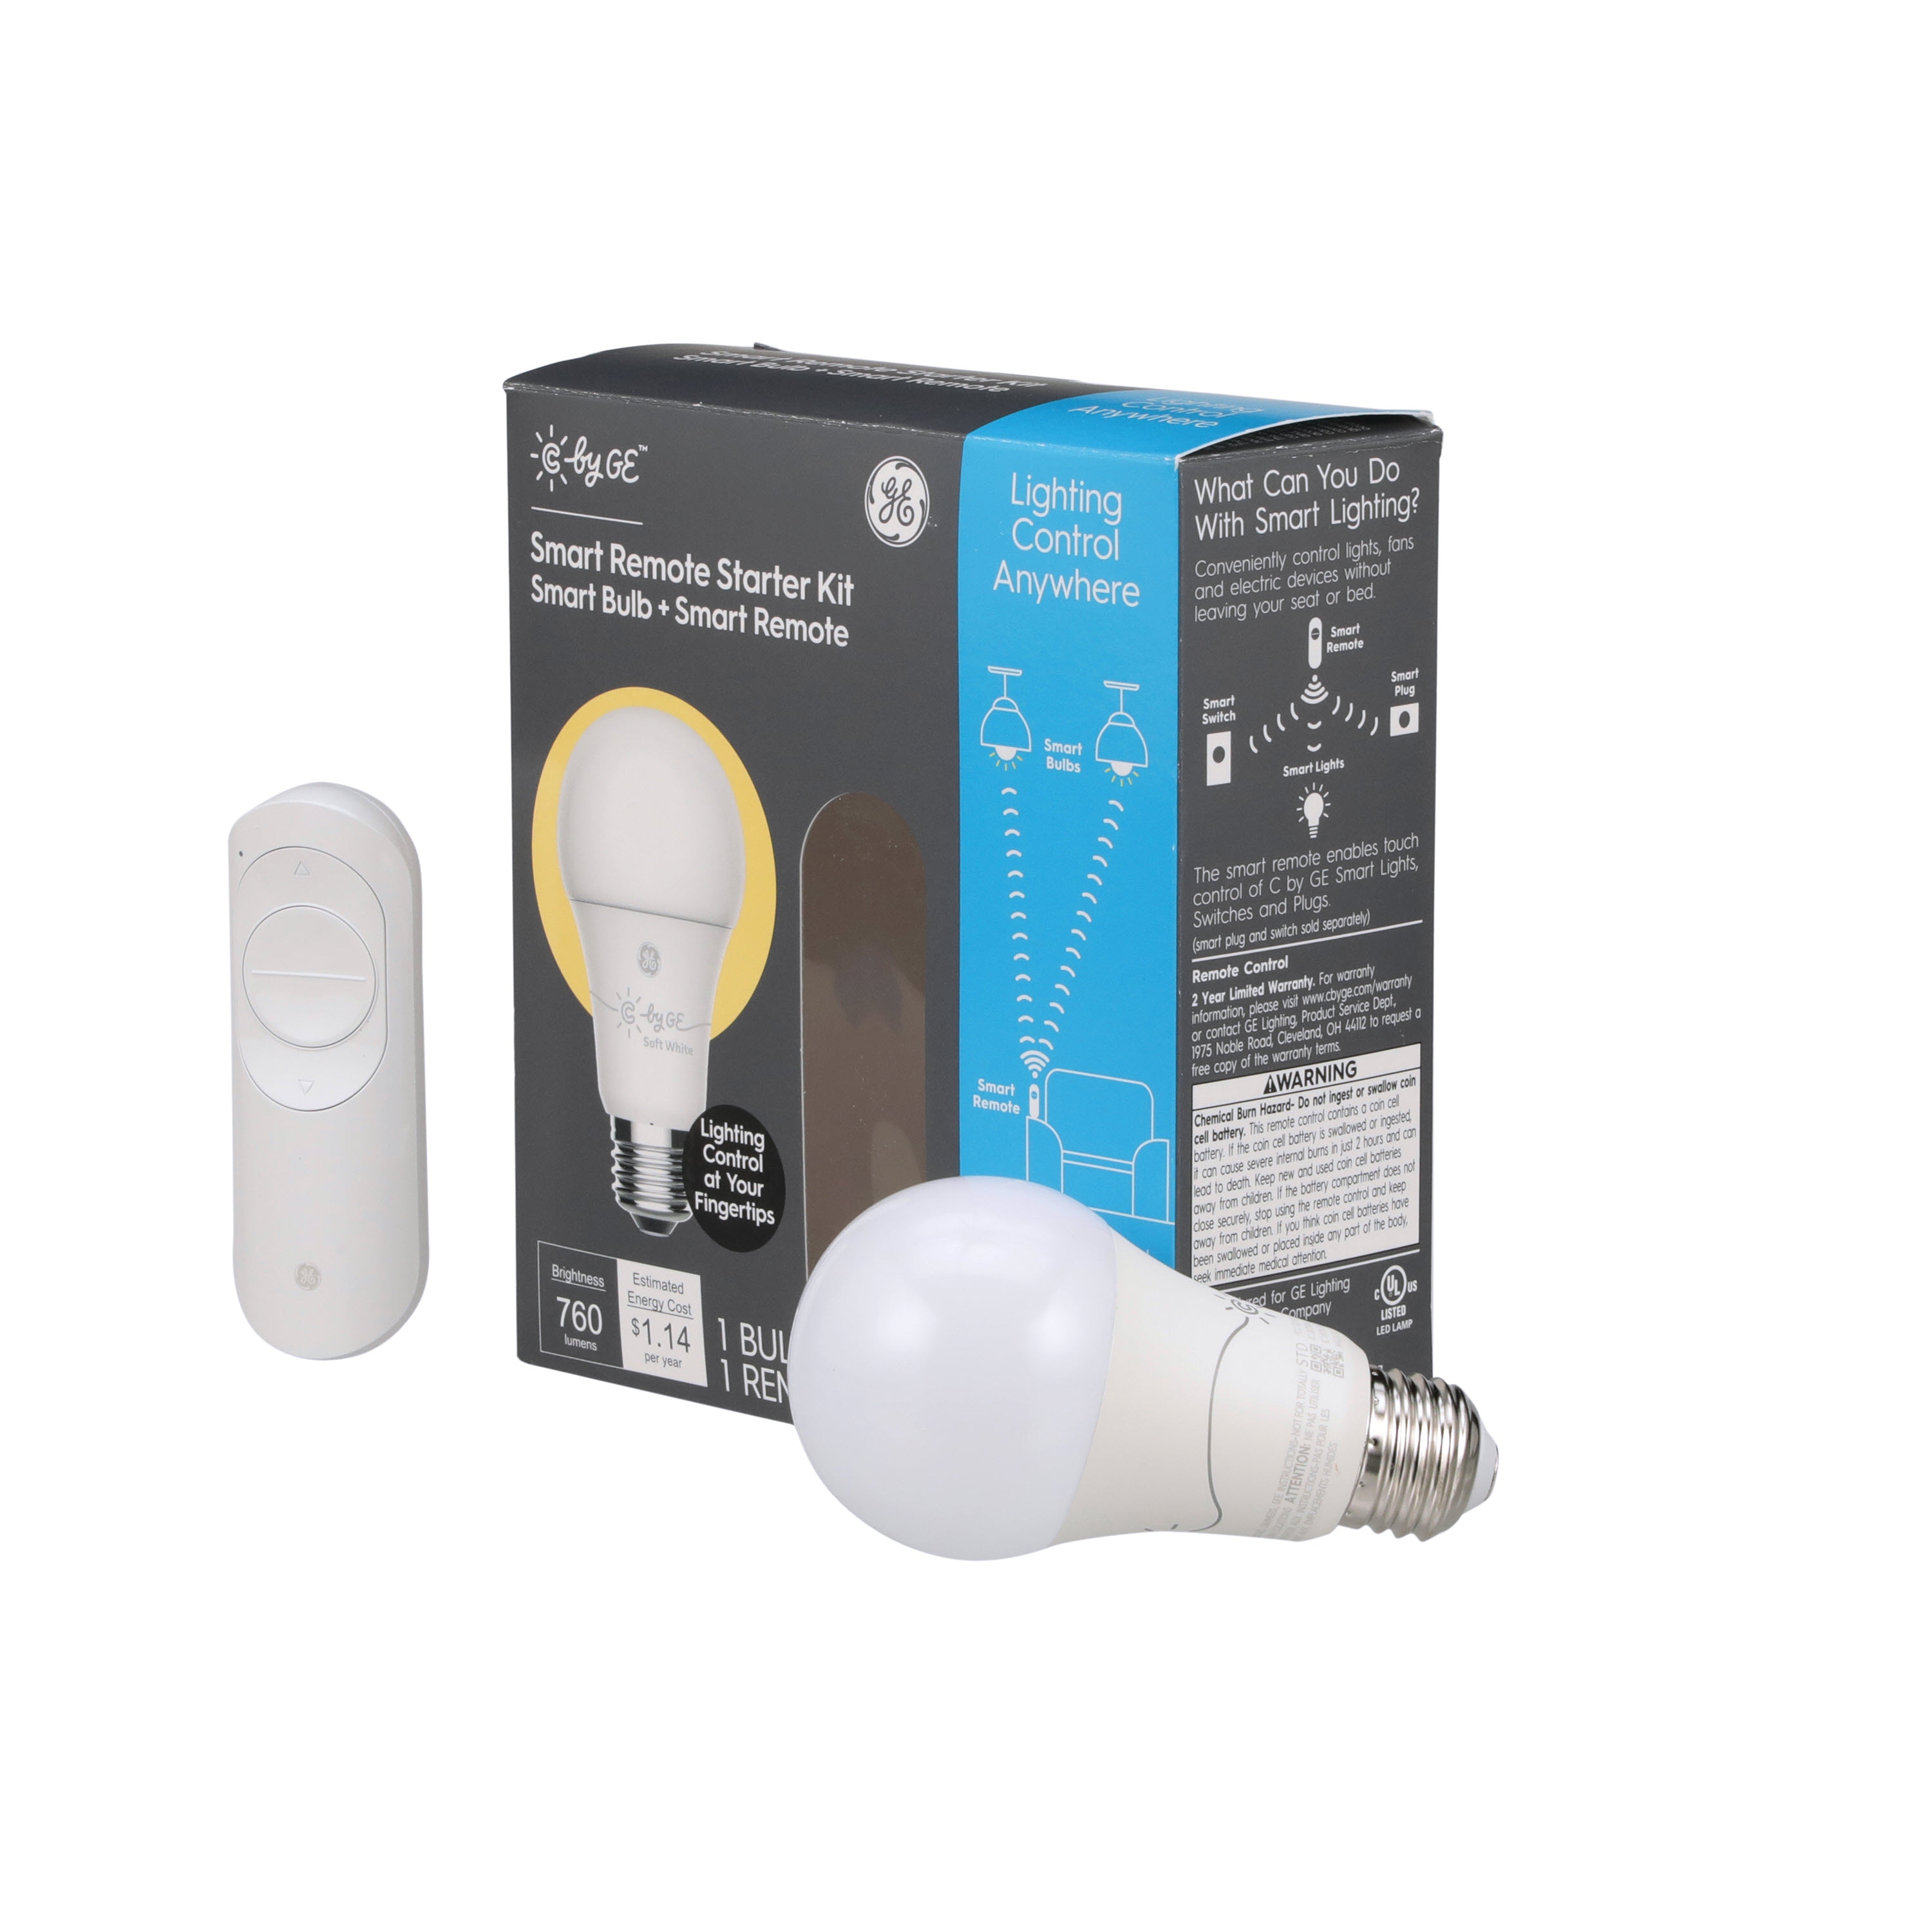 C by Ge-smart Remote Starter Home Kit White A19 Smart Bulb Google Alexa Dimmable for sale online 